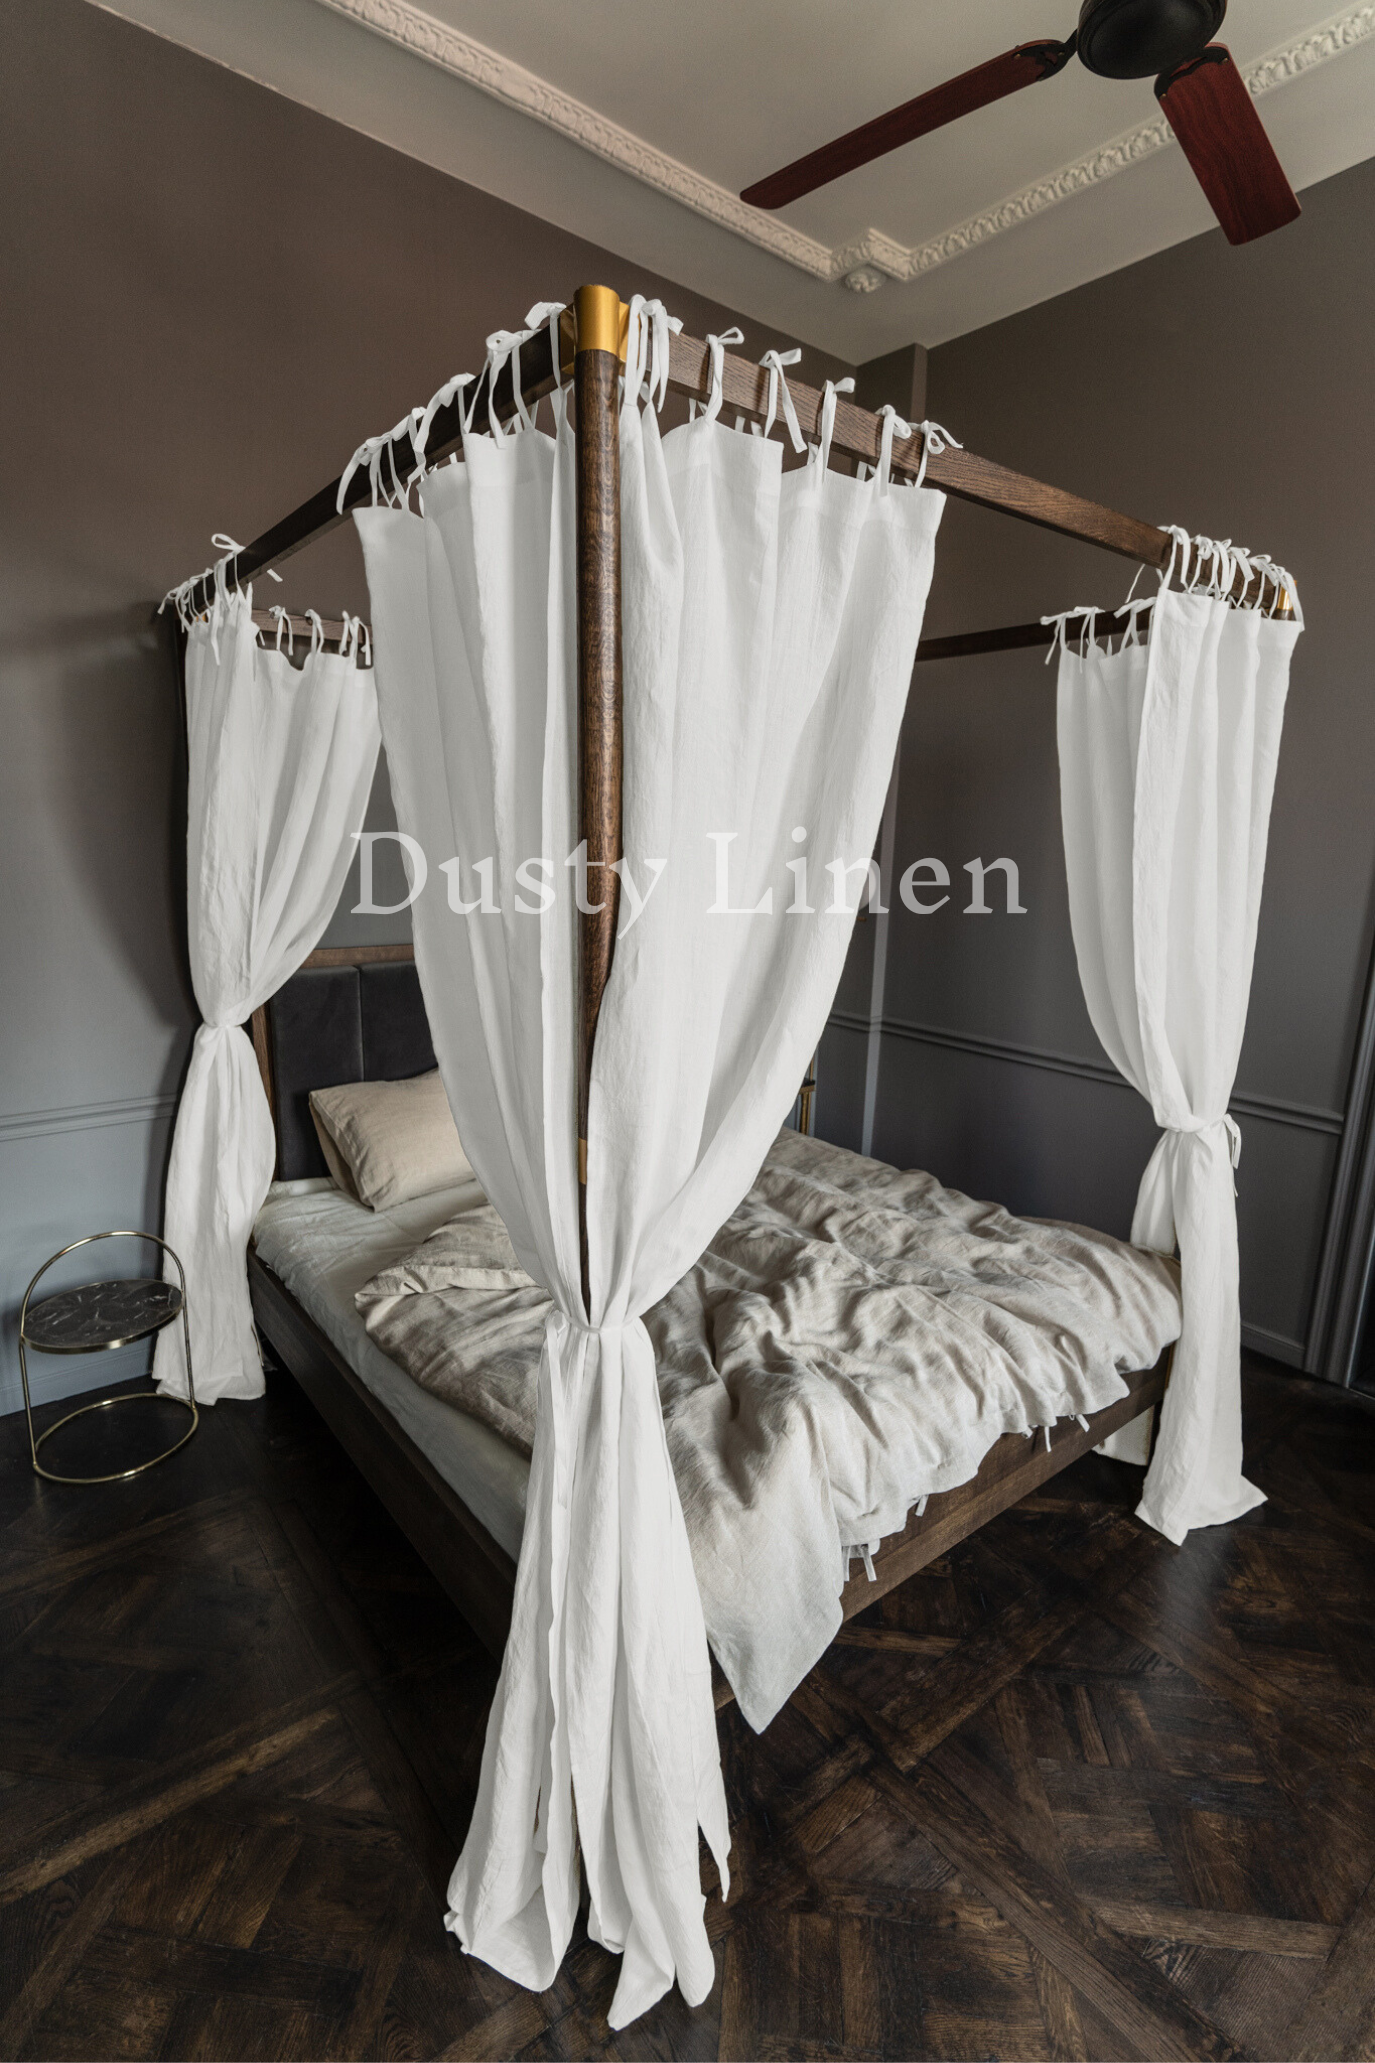 A bedroom with White color canopy bed drapes with ties in boho style. Made by DustyLinen